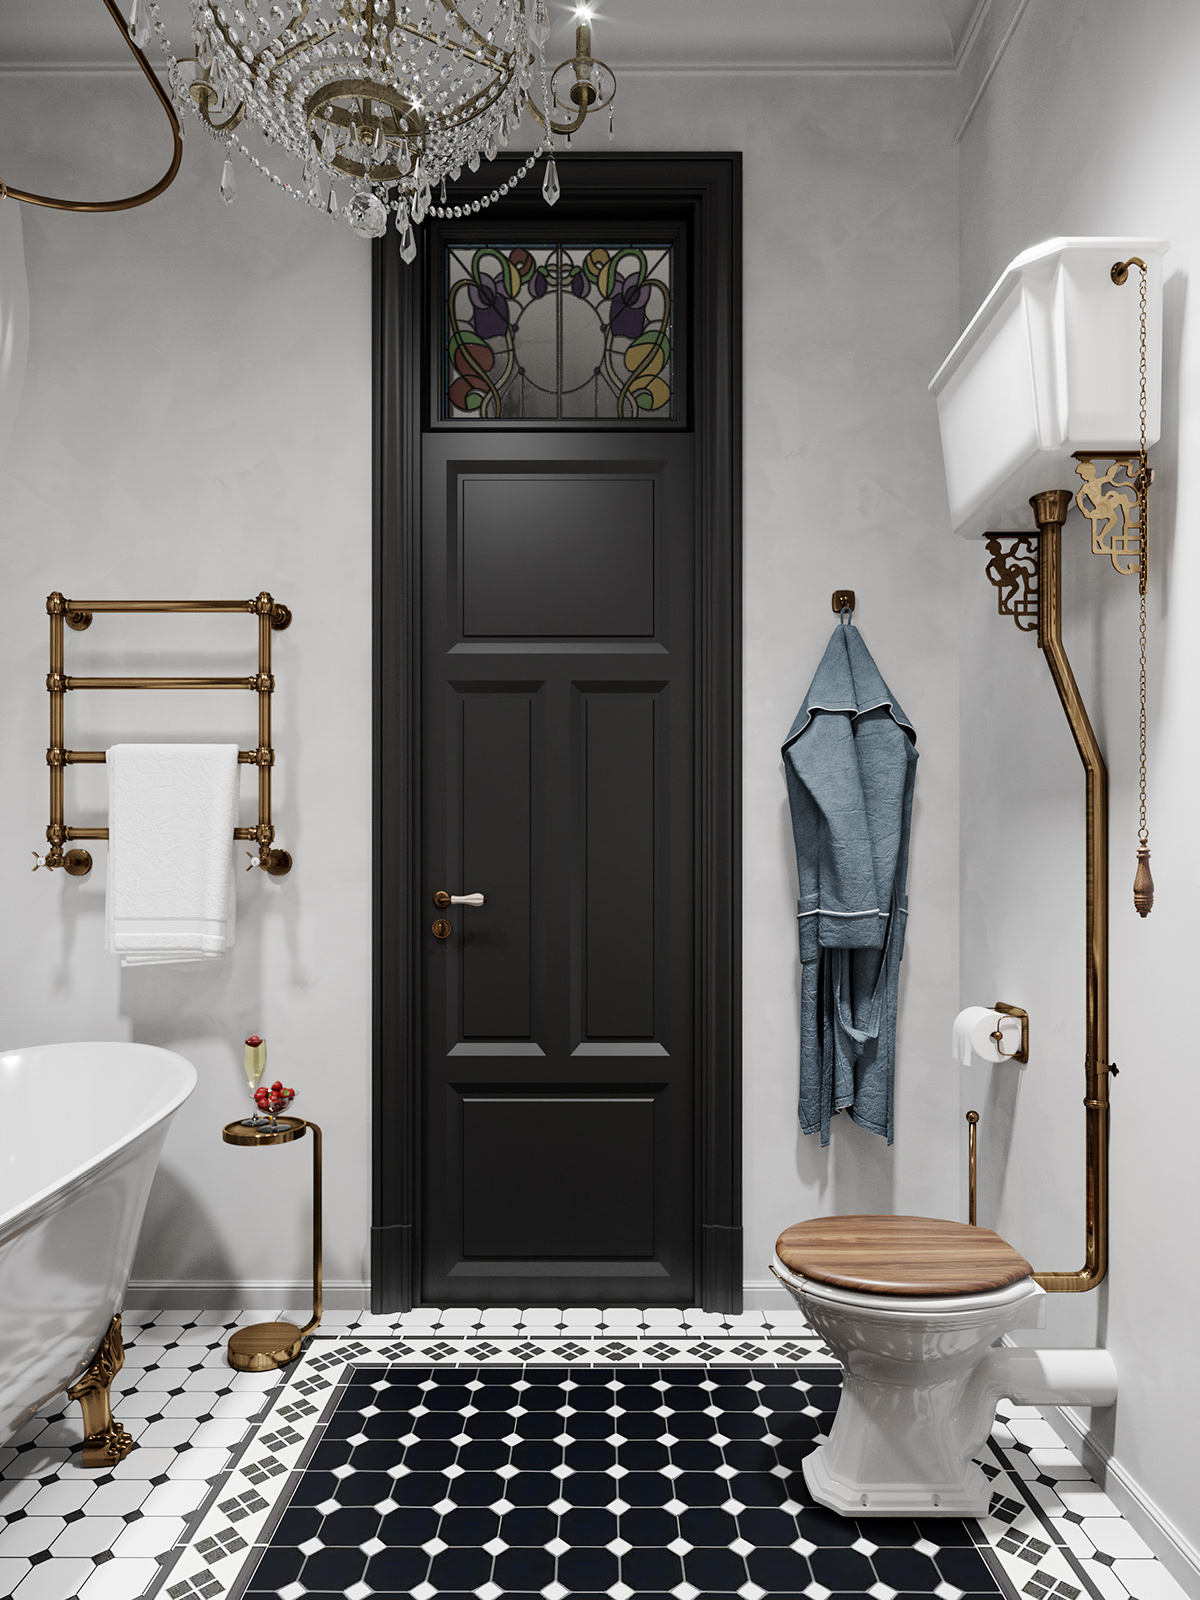 The European-style wooden bathroom door with metal handle enhances cleanliness, orderliness and courtesy.